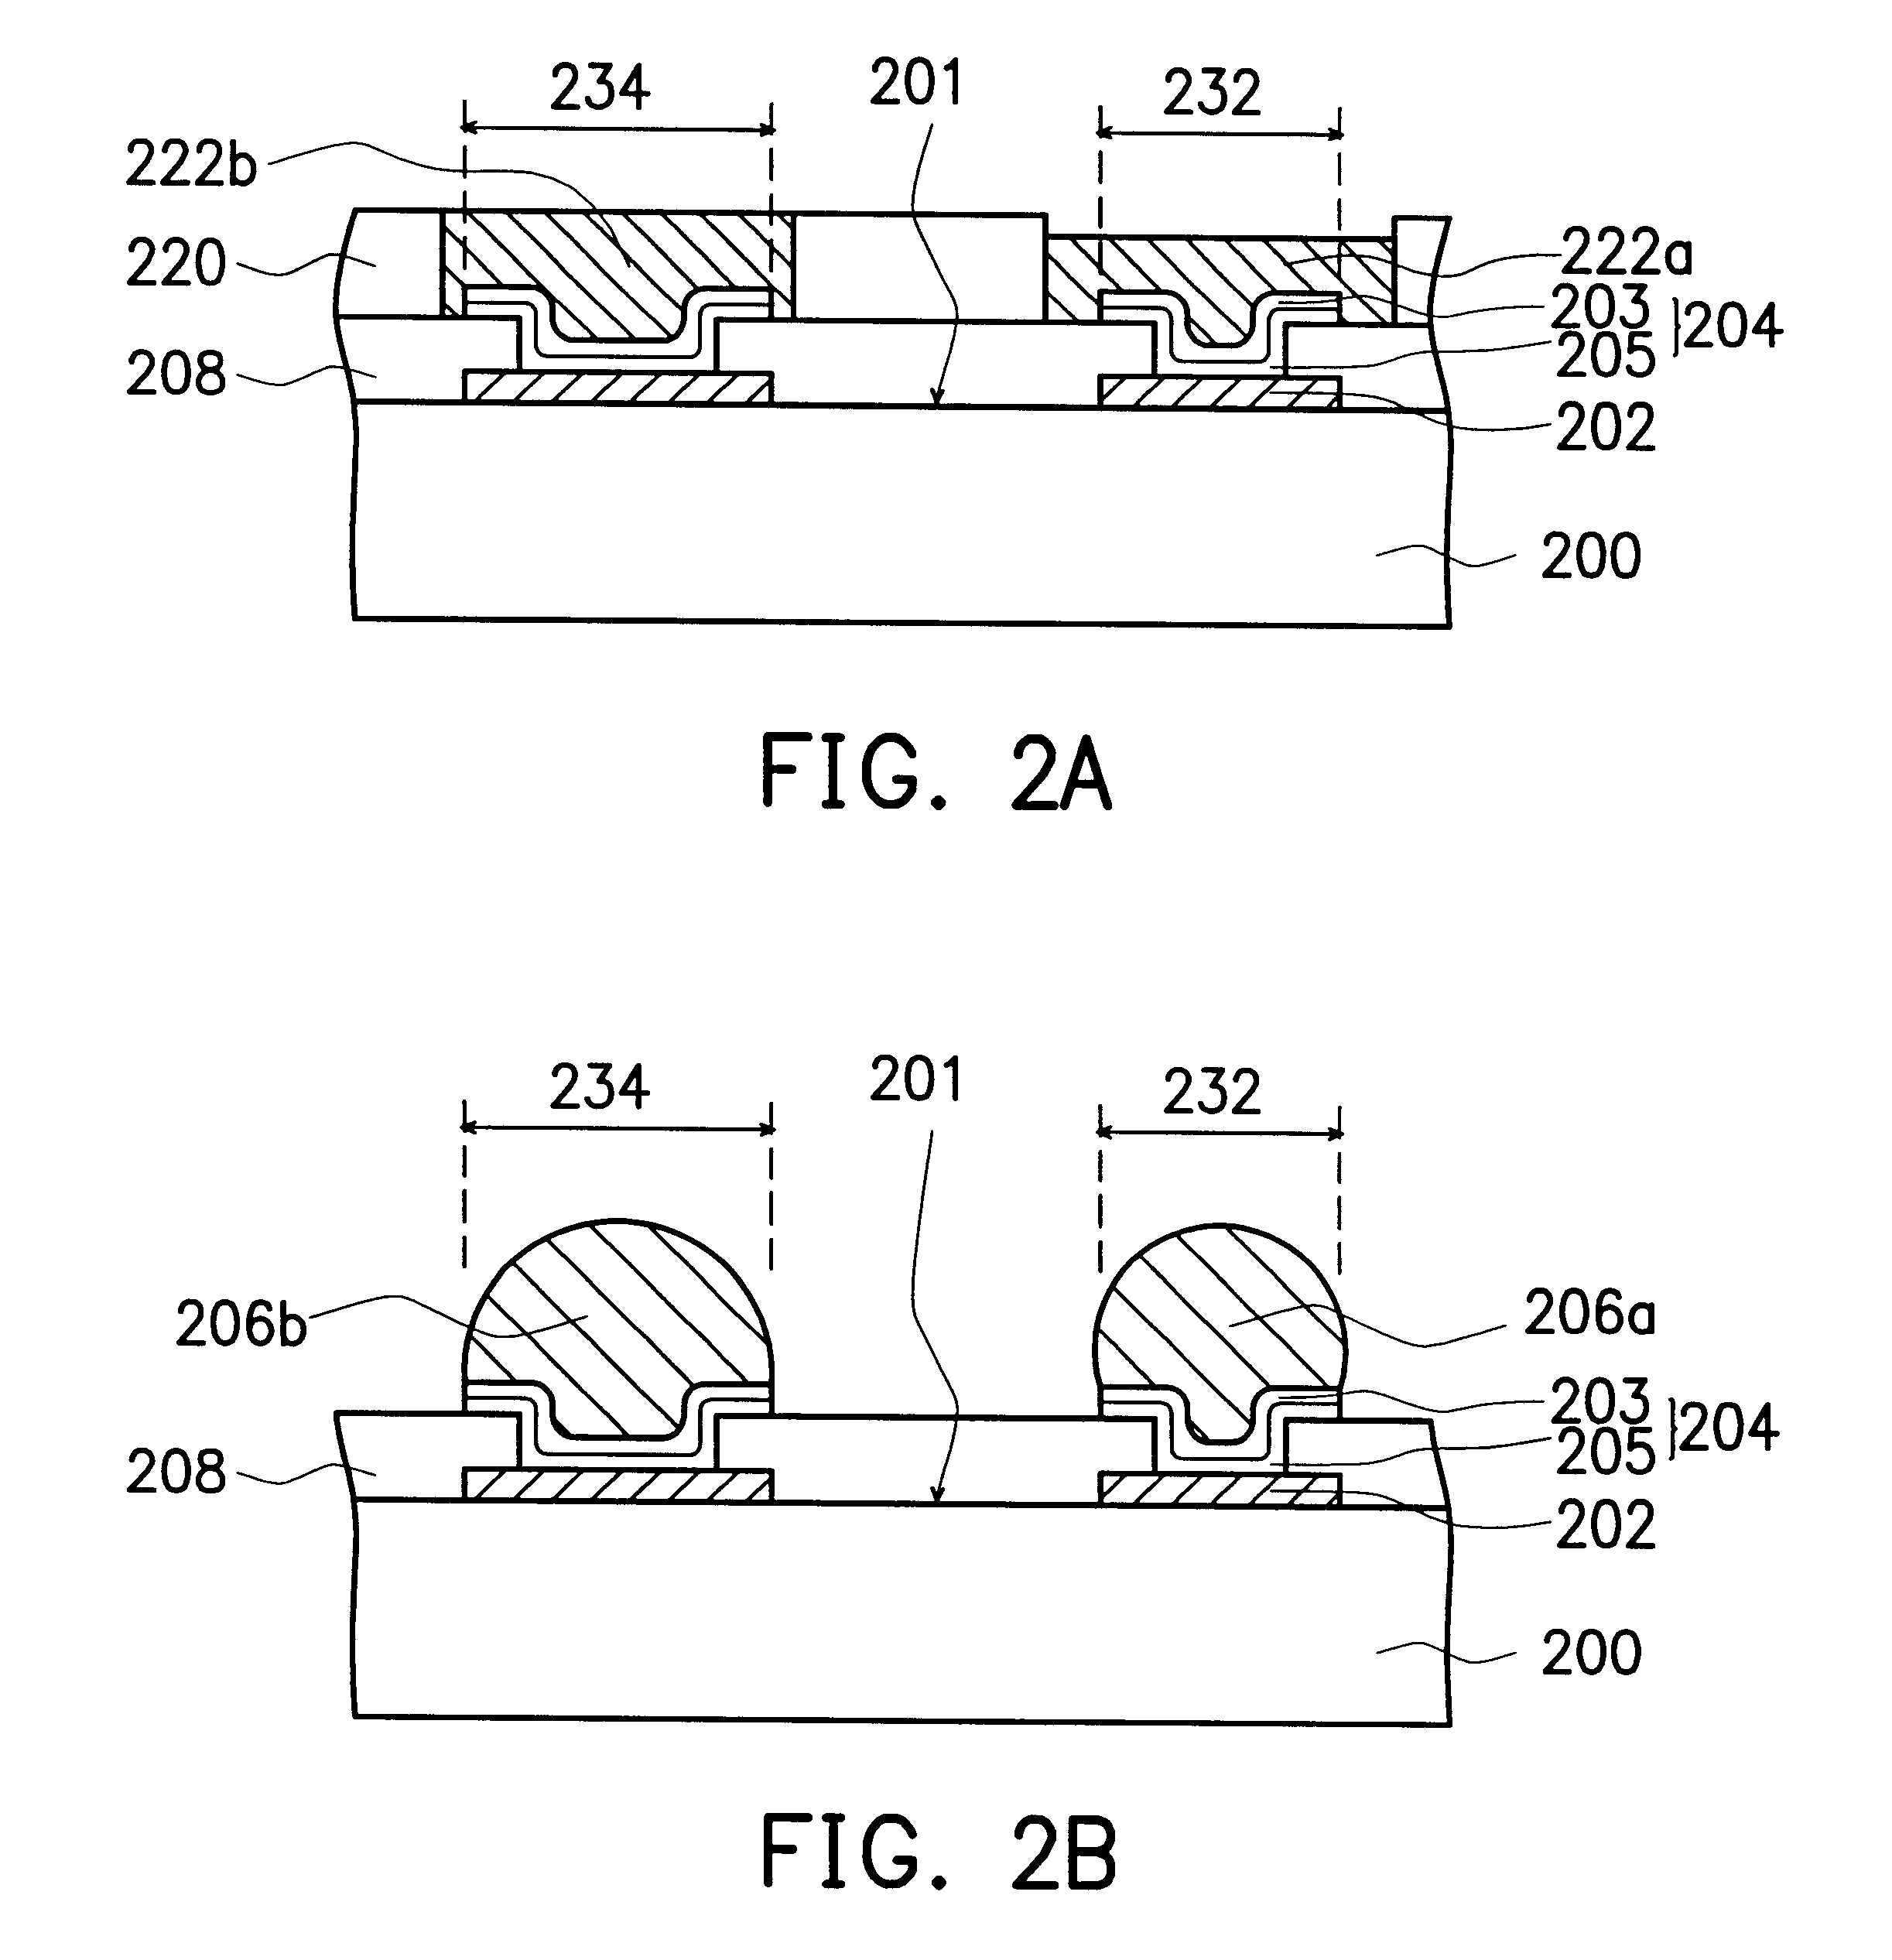 Structure of solder bumps with improved coplanarity and method of forming solder bumps with improved coplanarity